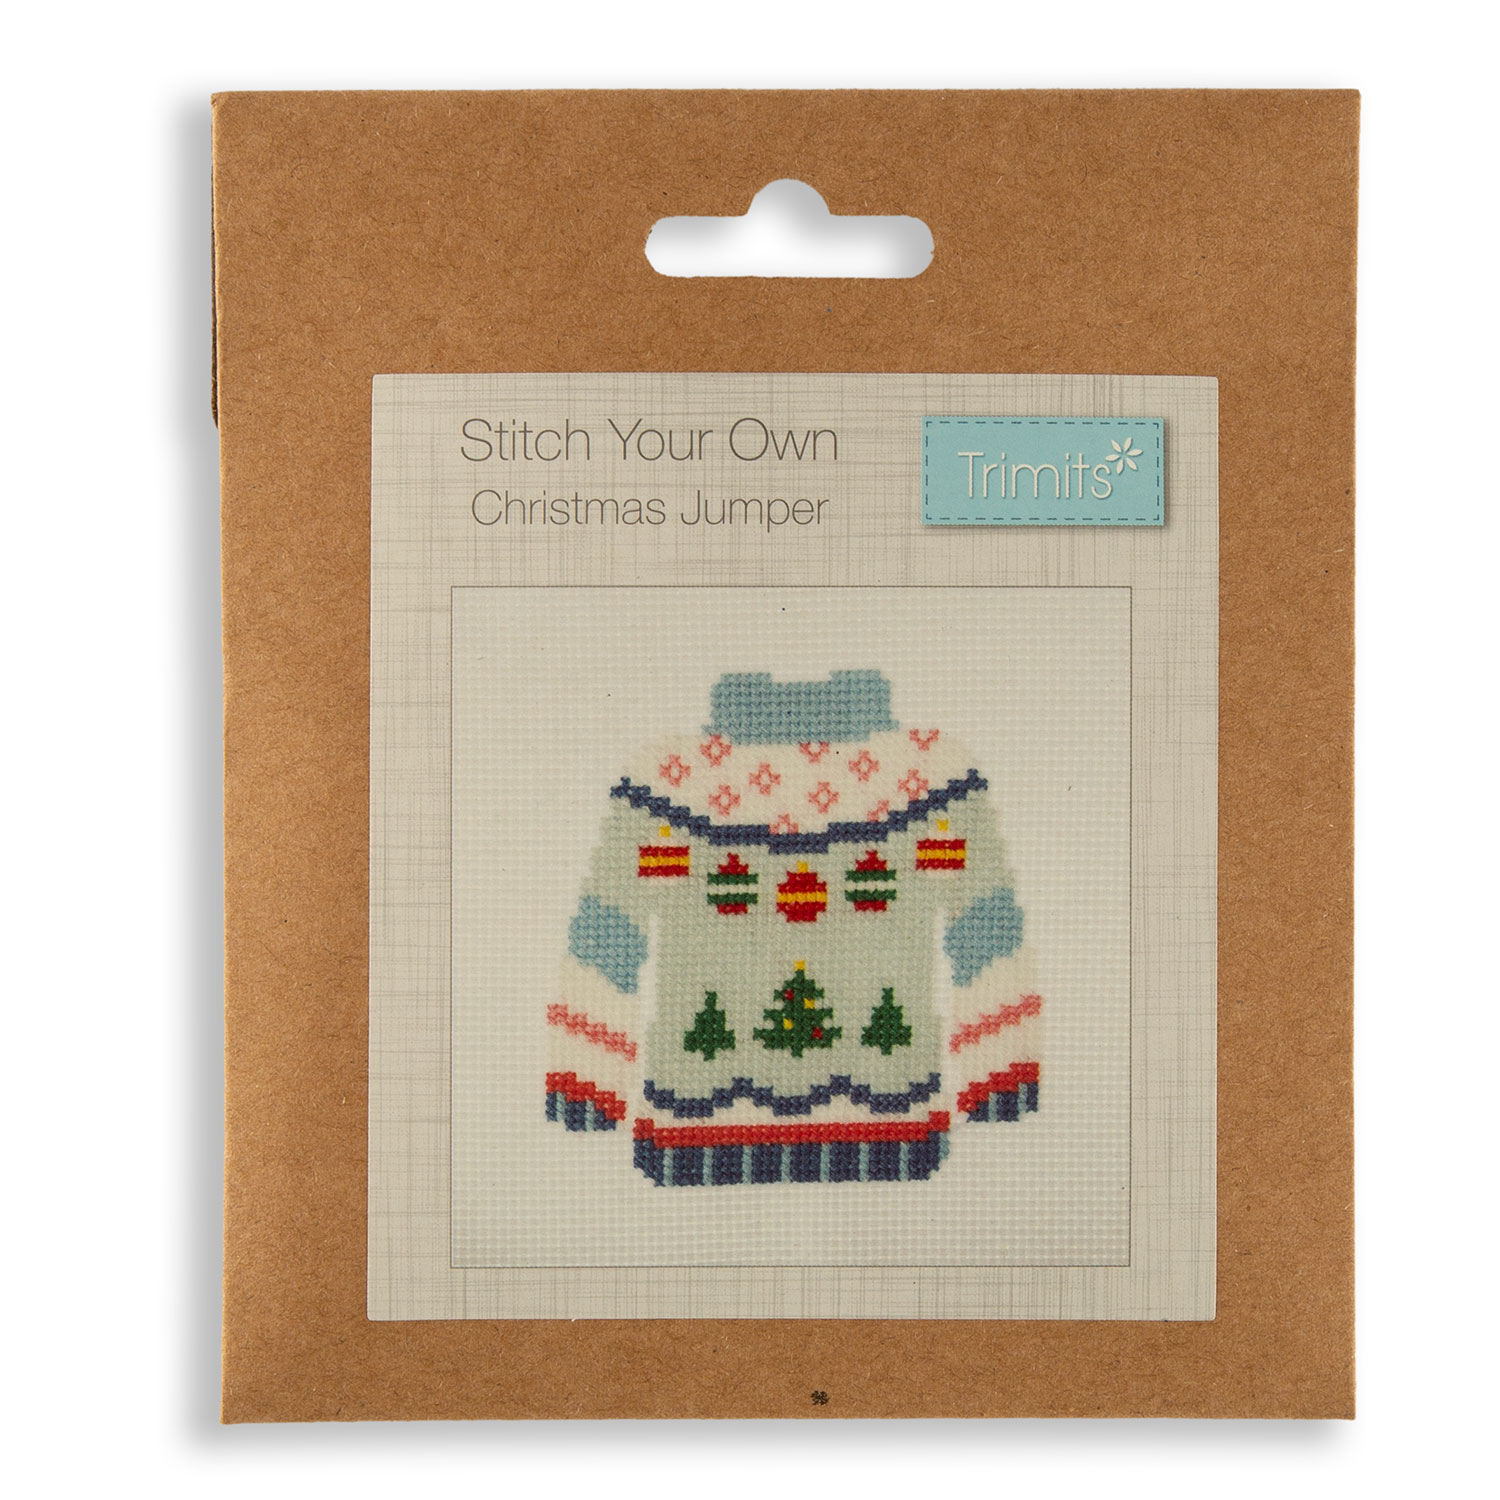 Trimits Christmas Counted Cross Stitch Kit - Choose Any 4 - Jumper